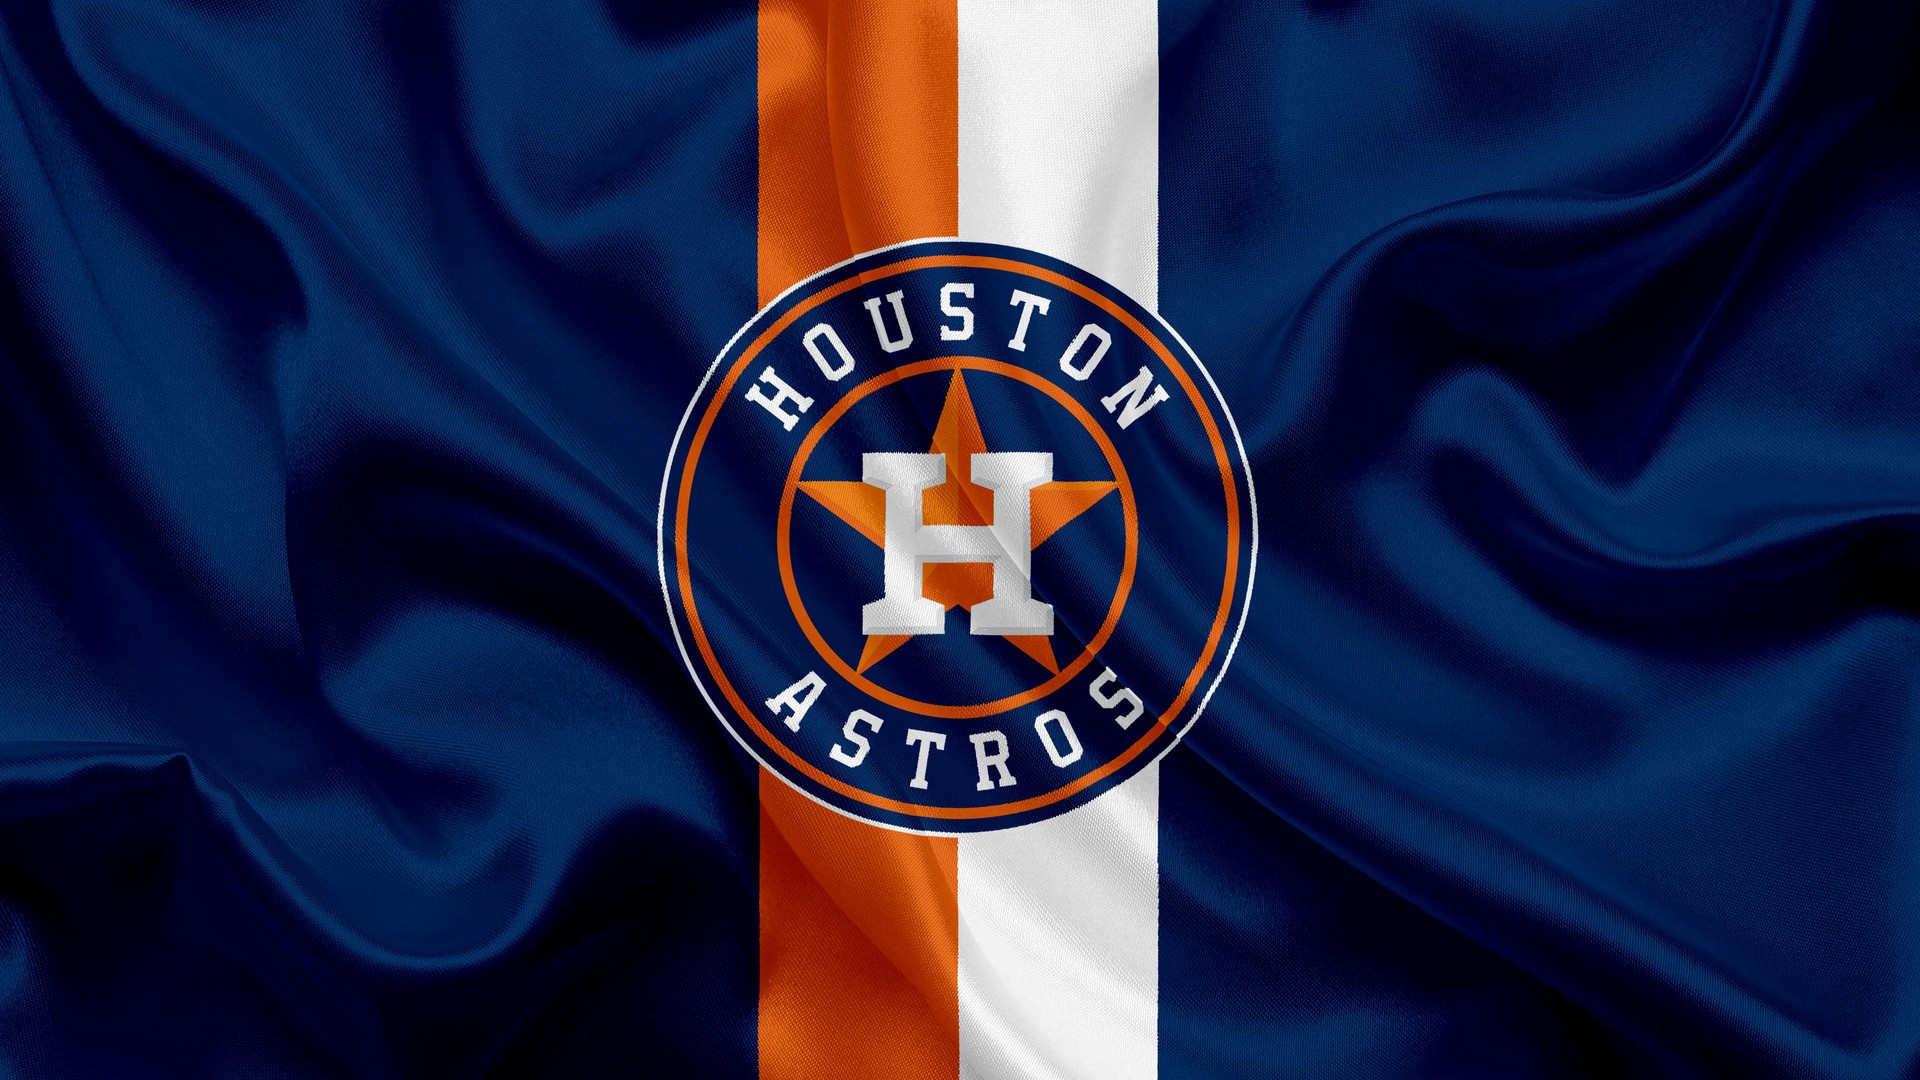 Houston Astros Logo Wallpaper HD with high-resolution 1920x1080 pixel. You can use this wallpaper for Mac Desktop Wallpaper, Laptop Screensavers, Android Wallpapers, Tablet or iPhone Home Screen and another mobile phone device